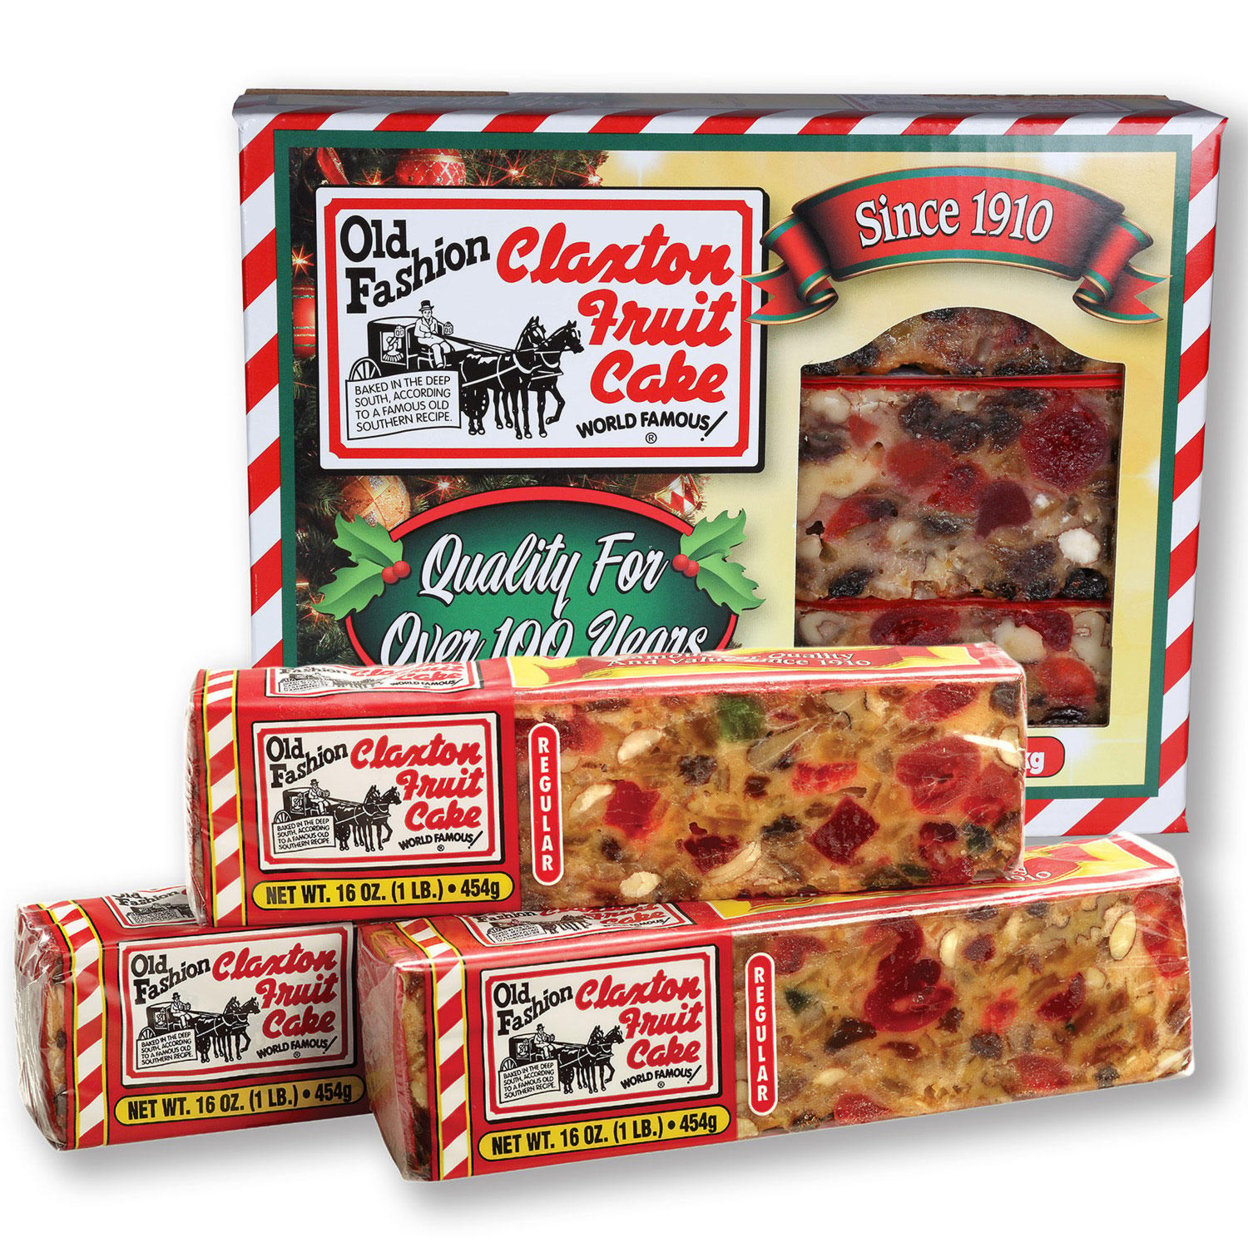 Claxton Fruit Cake, 16 Ounce (3 Pack)